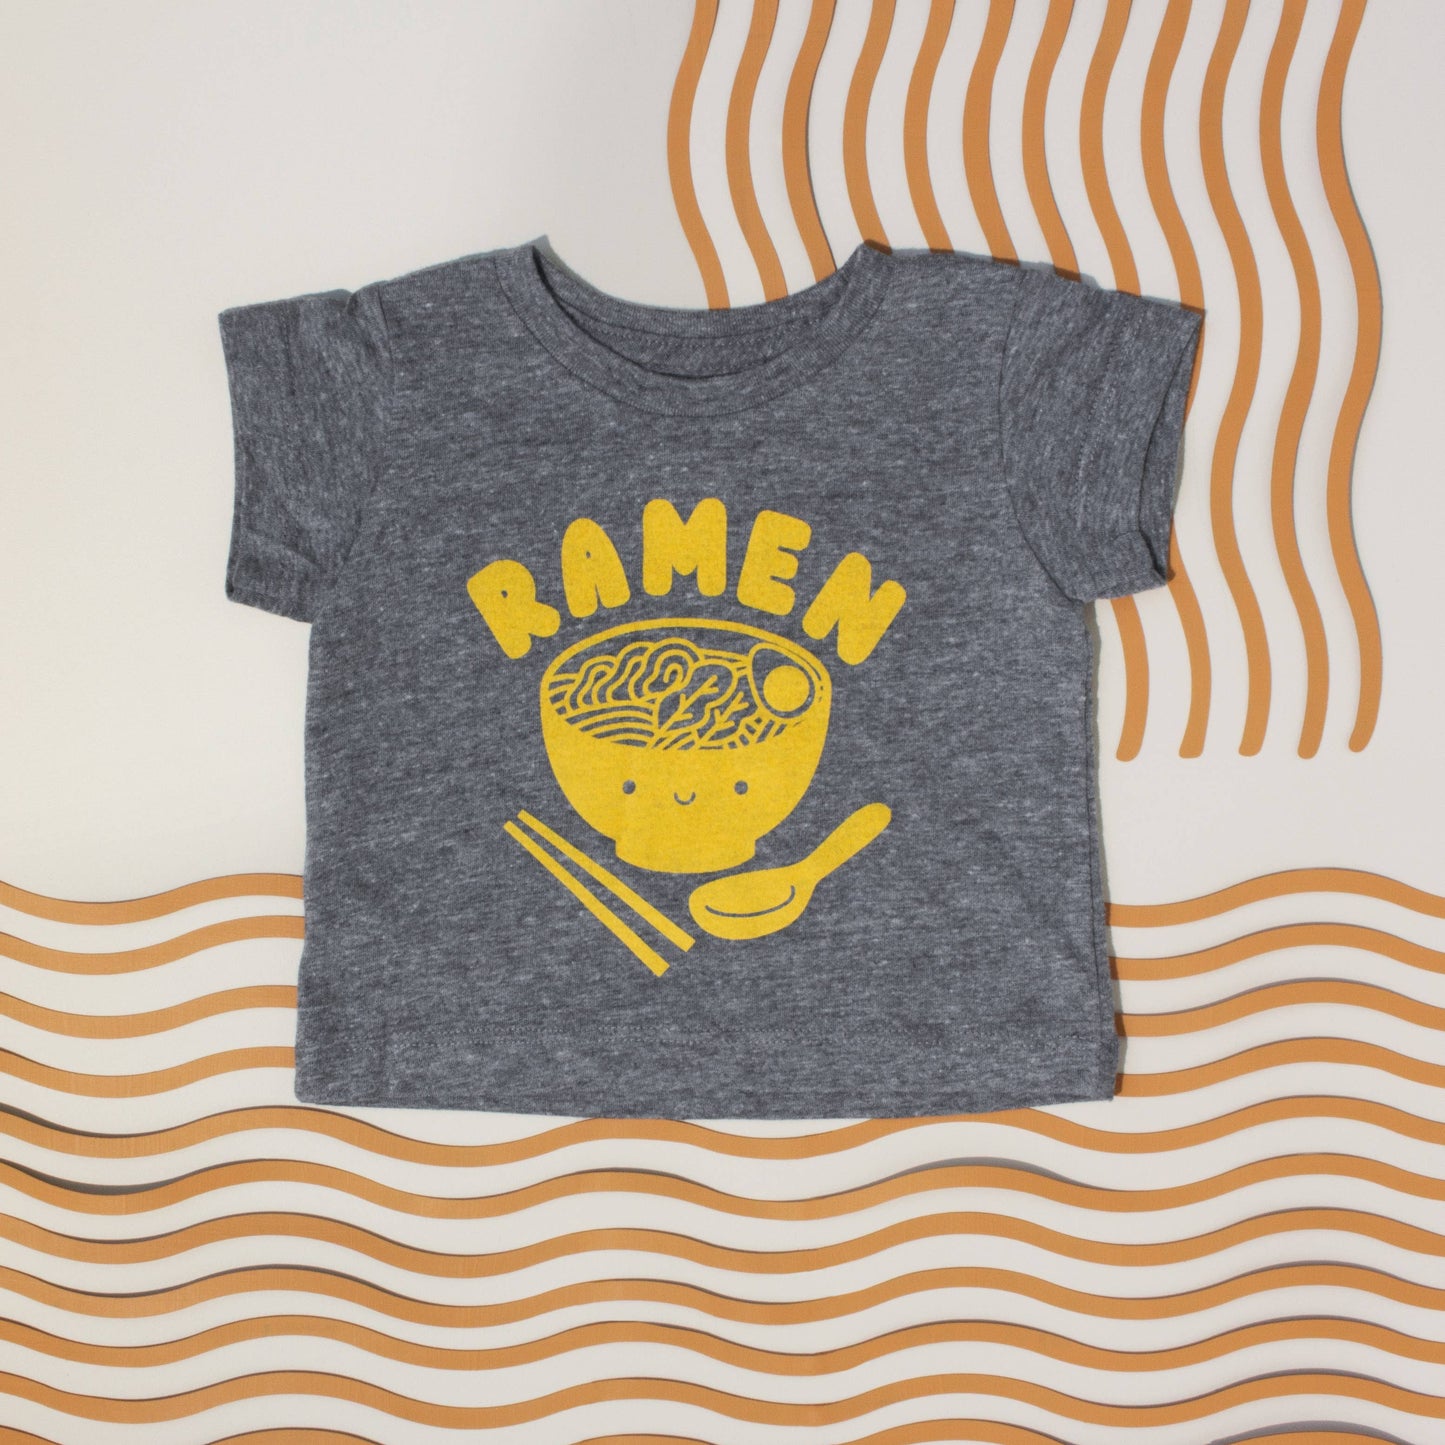 Dark gray toddler/kids tee with a kawaii bowl of ramen, printed in yellow ink, and text that reads "Ramen" across the chest